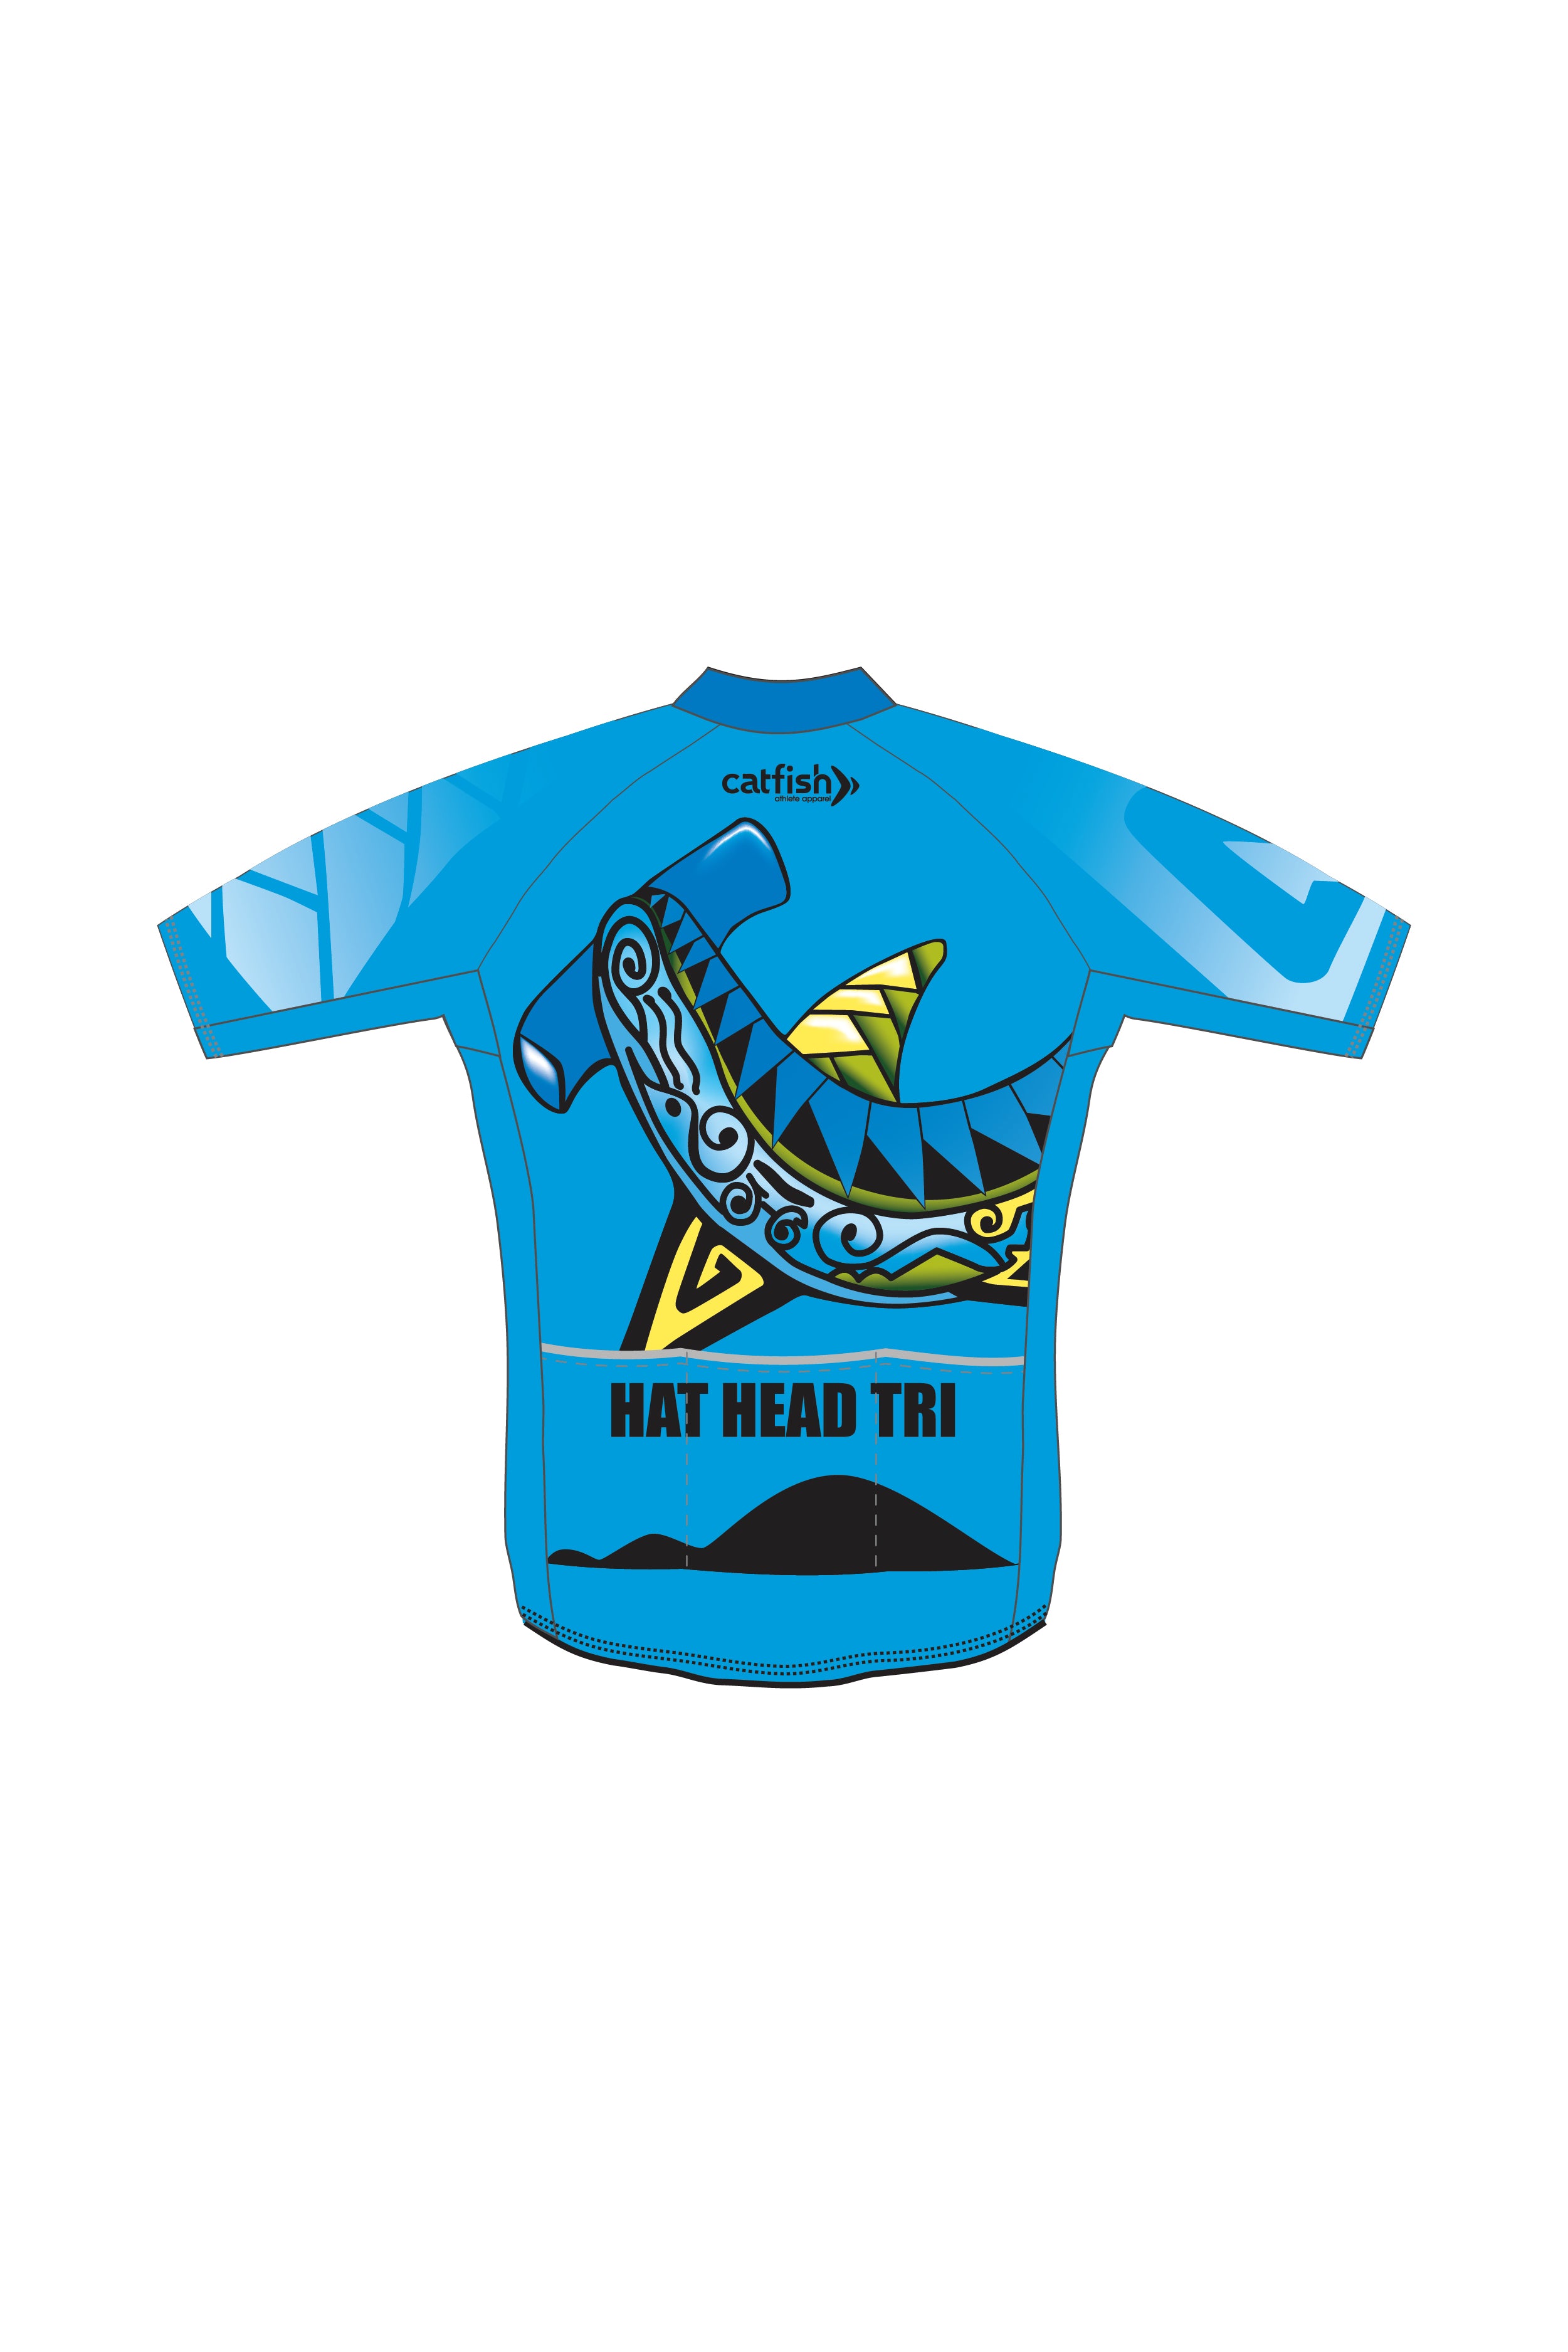 Hat Head Tri Men's Cycle Jersey